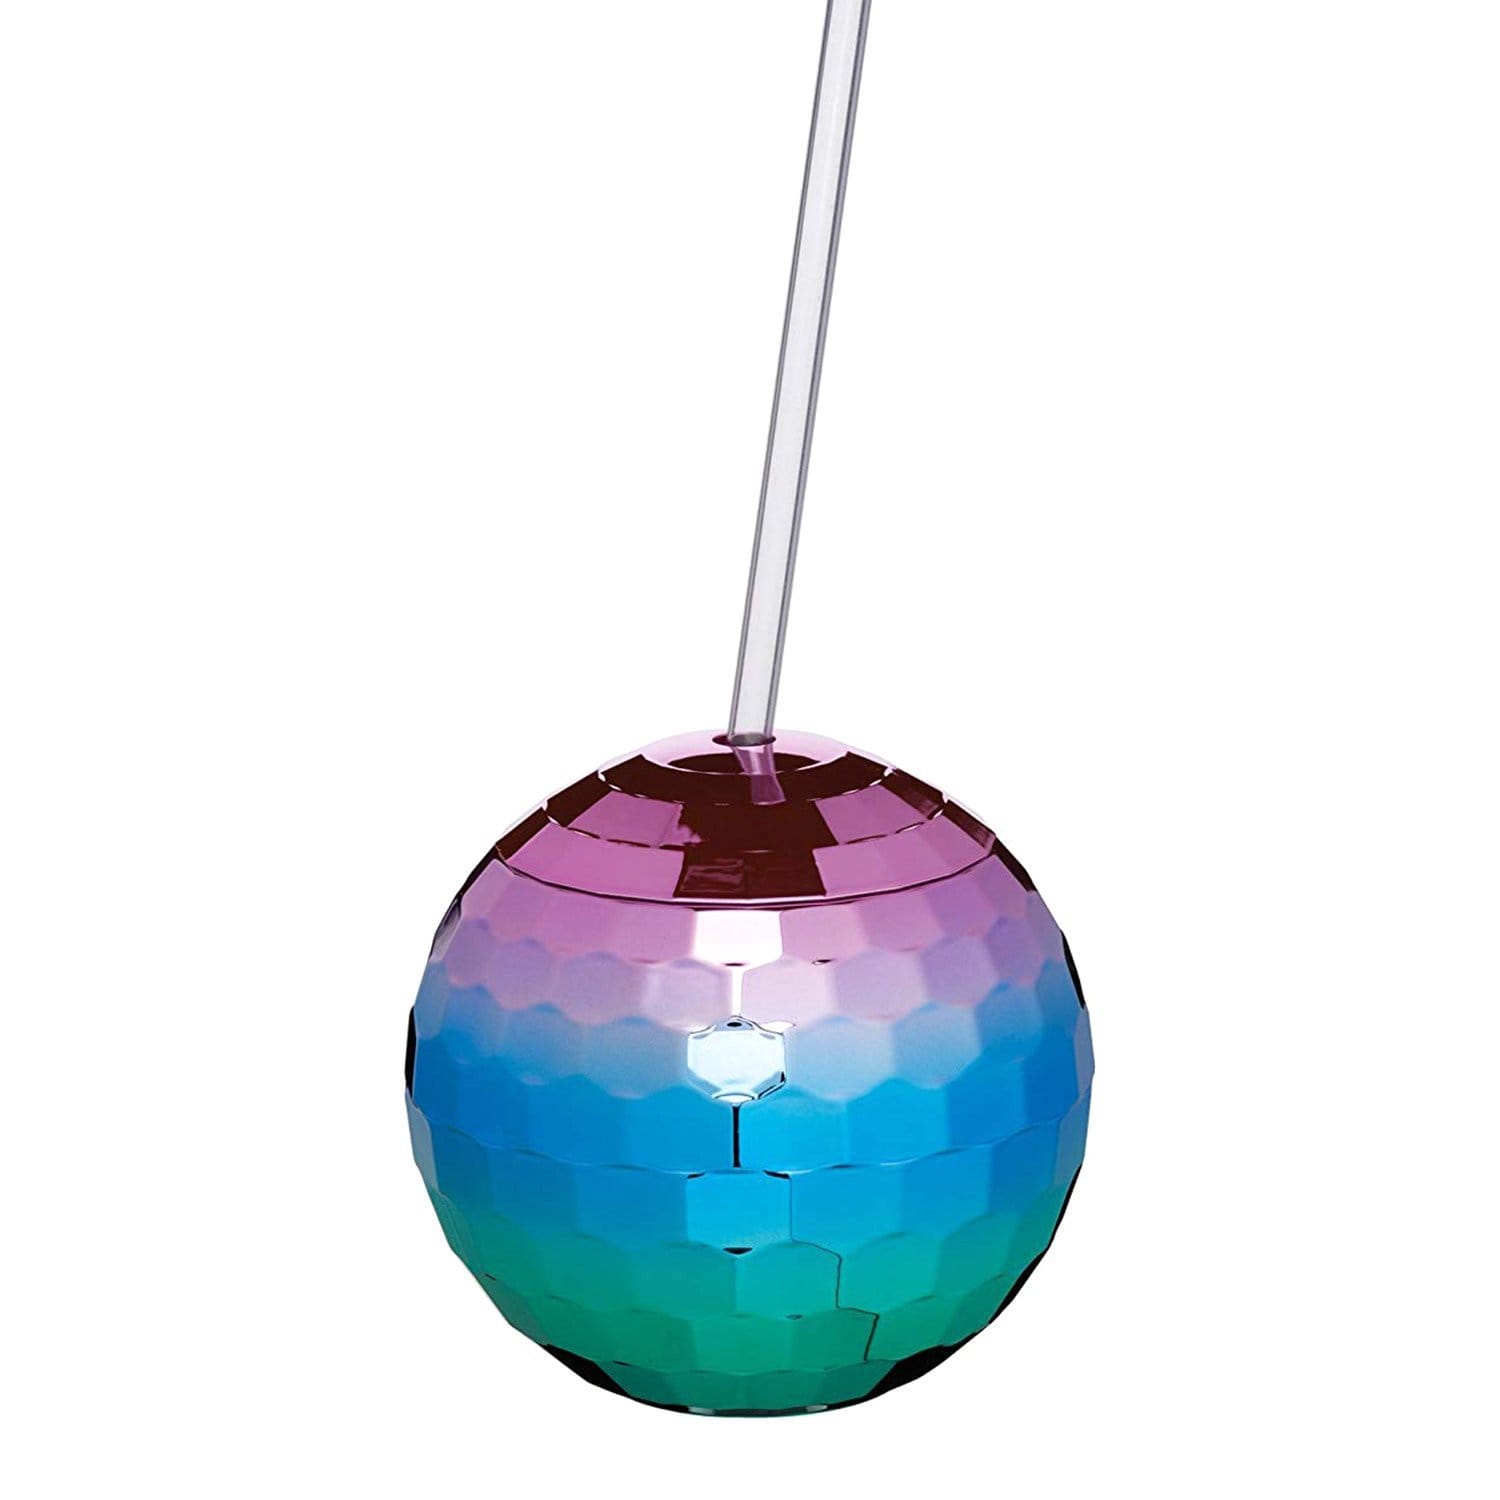 KitchenCraft BarCraft Disco Ball Cocktail Cup with Straw - Multicolour - BCDISCO - Jashanmal Home